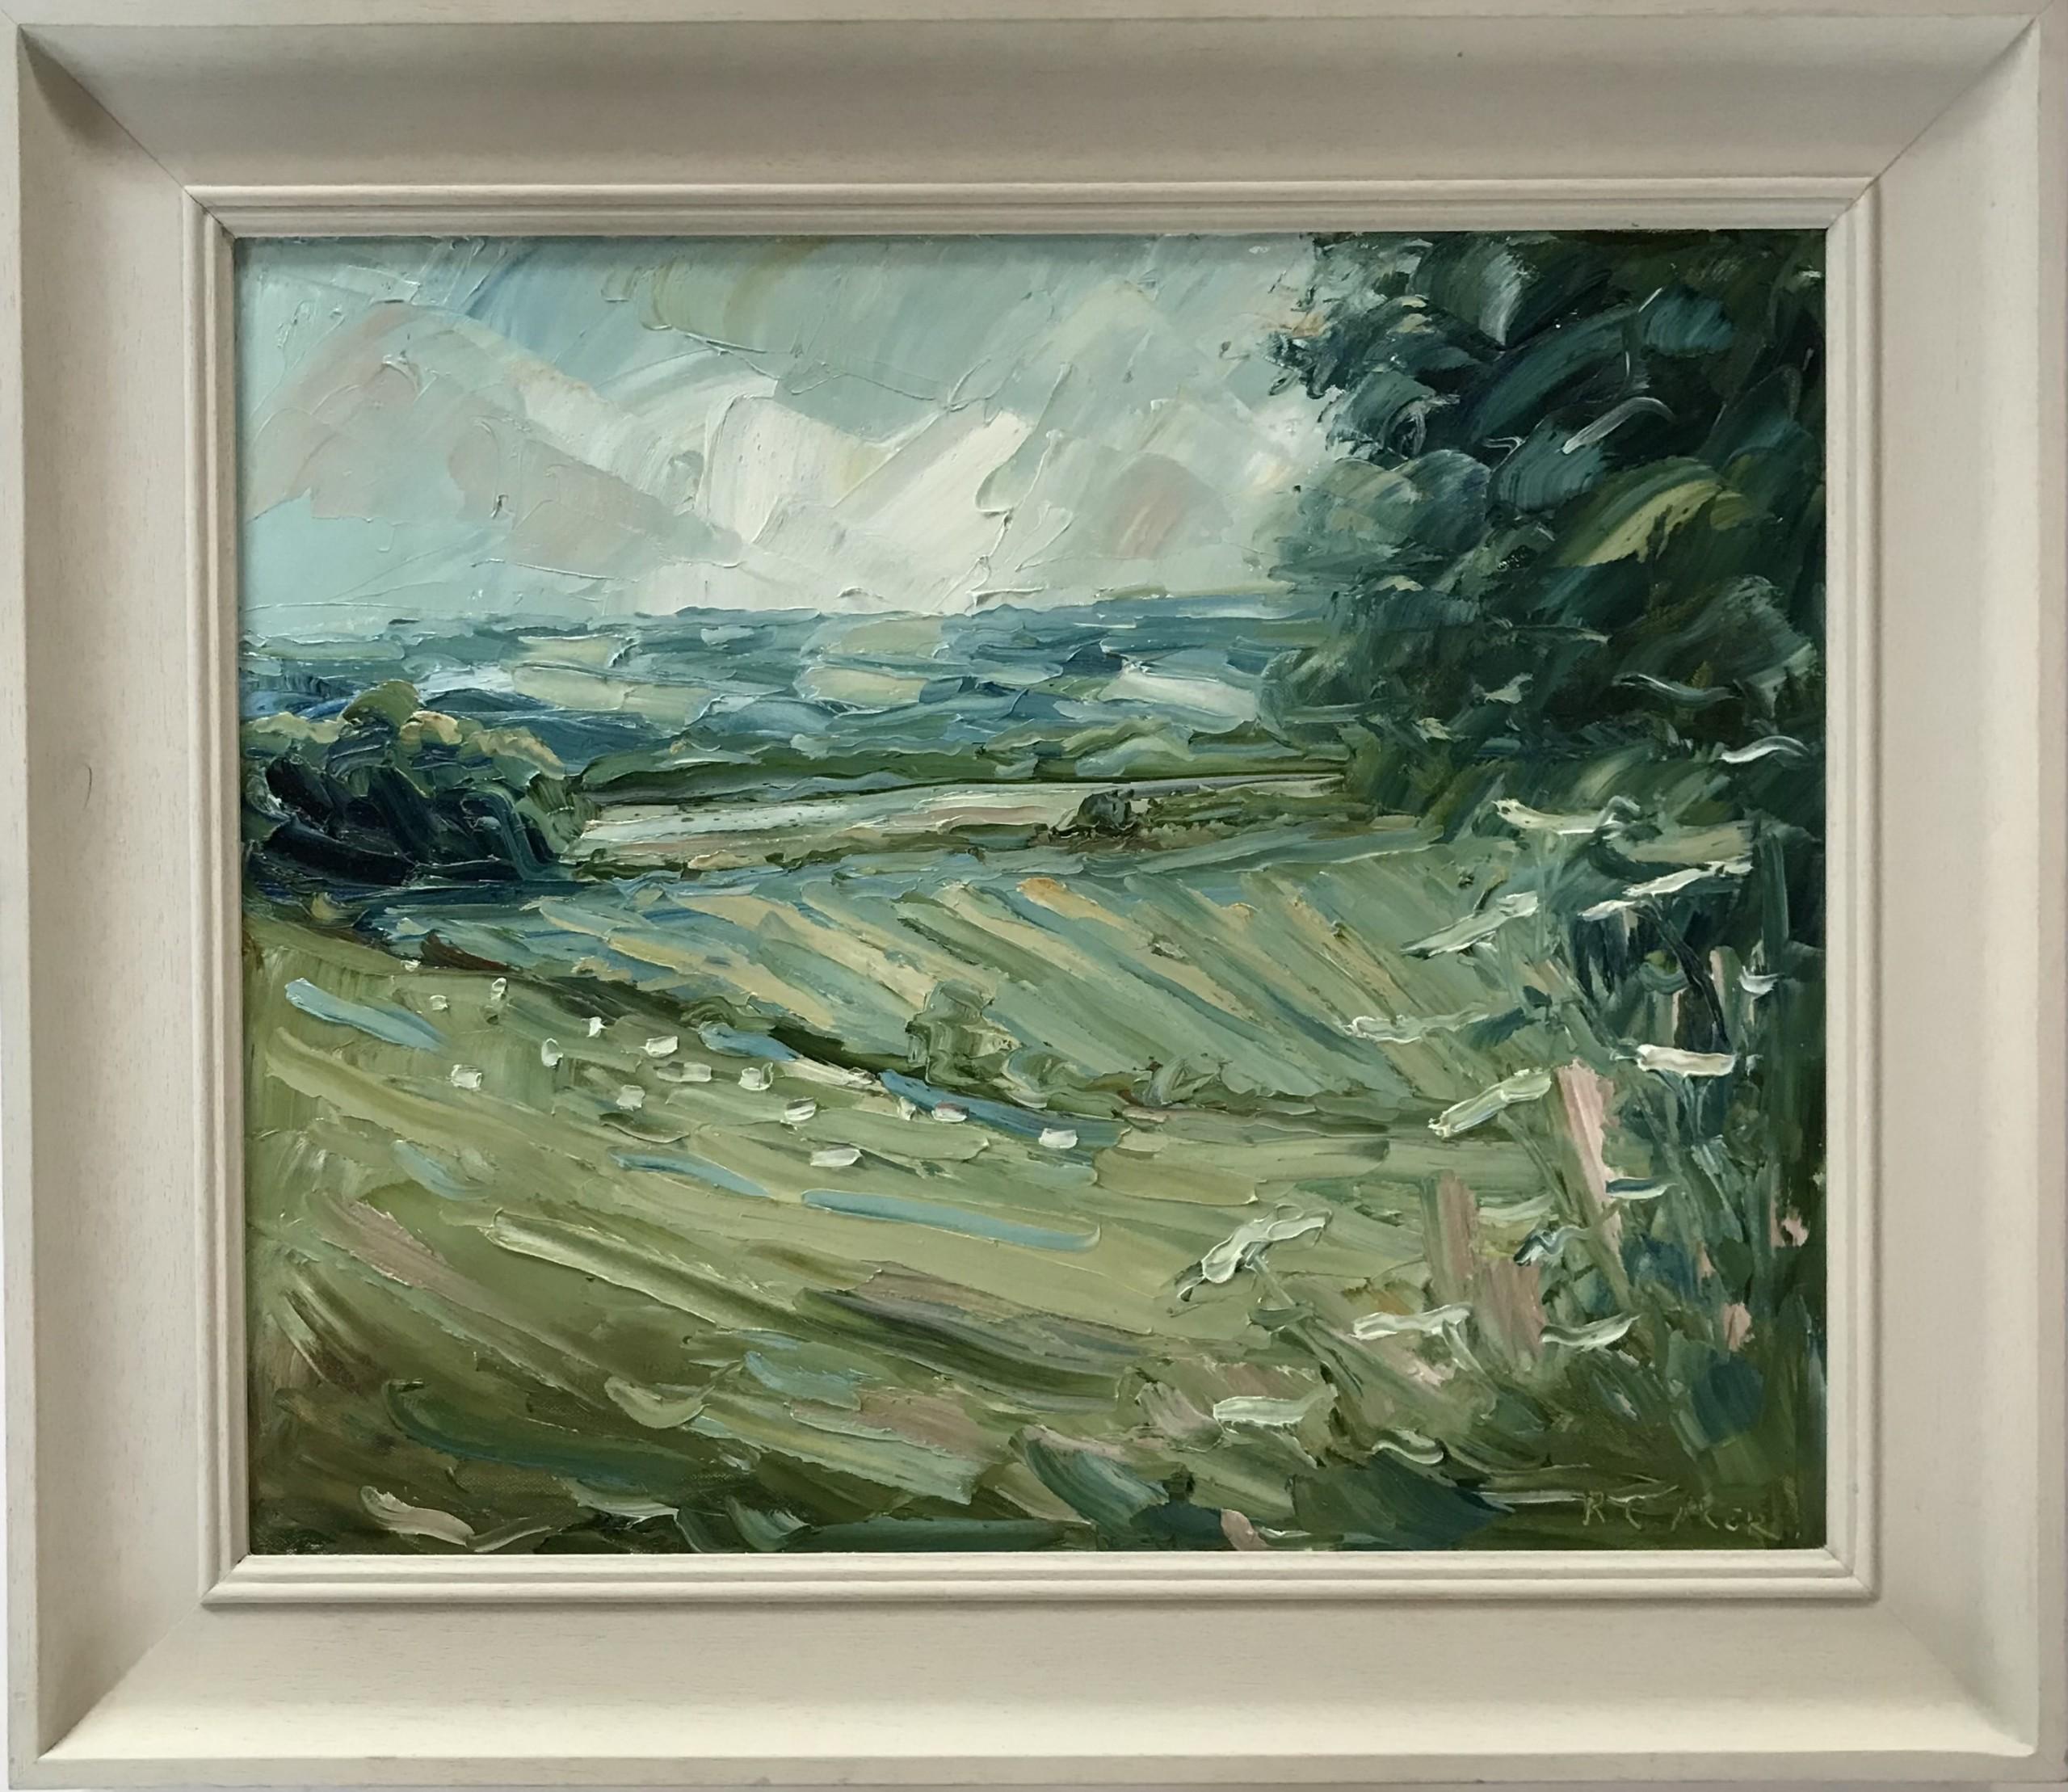 Looking out from Ledwell by Rupert Aker [2022]
original and hand signed by the artist 
Oil on Canvas
Image size: H:50 cm x W:58 cm
Complete Size of Unframed Work: H:50 cm x W:58 cm x D:2.5cm
Frame Size: H:64.5 cm x W:75 cm x D:4cm
Sold Framed
Please